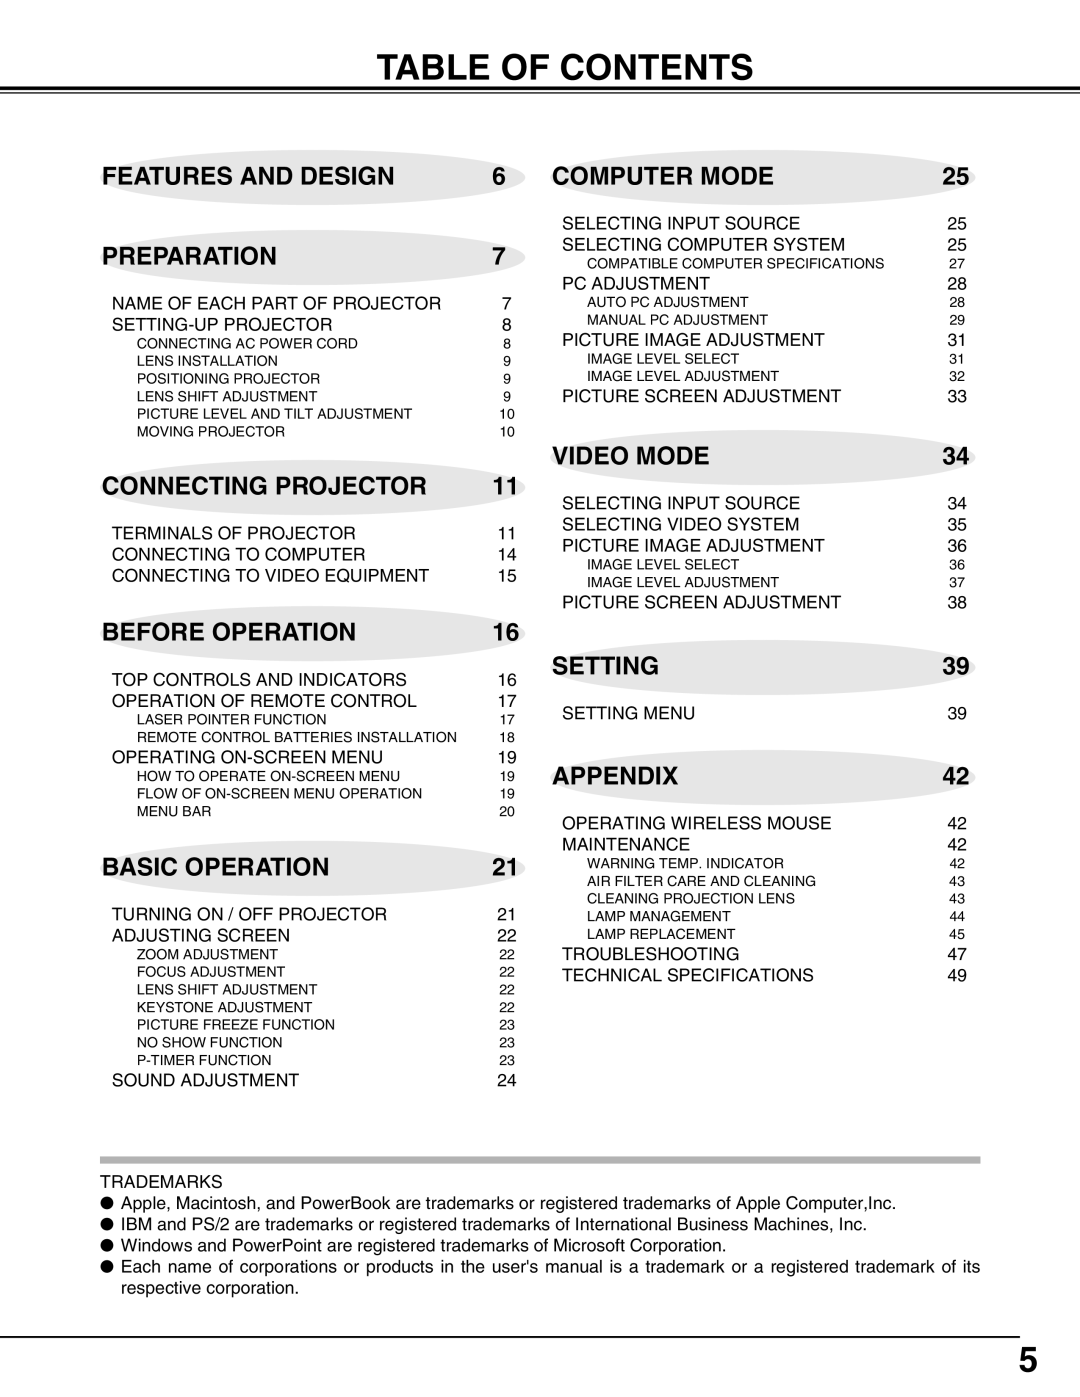 Christie Digital Systems 38-VIV302-01 Table Of Contents, Features And Design, Computer Mode, Preparation, Video Mode 